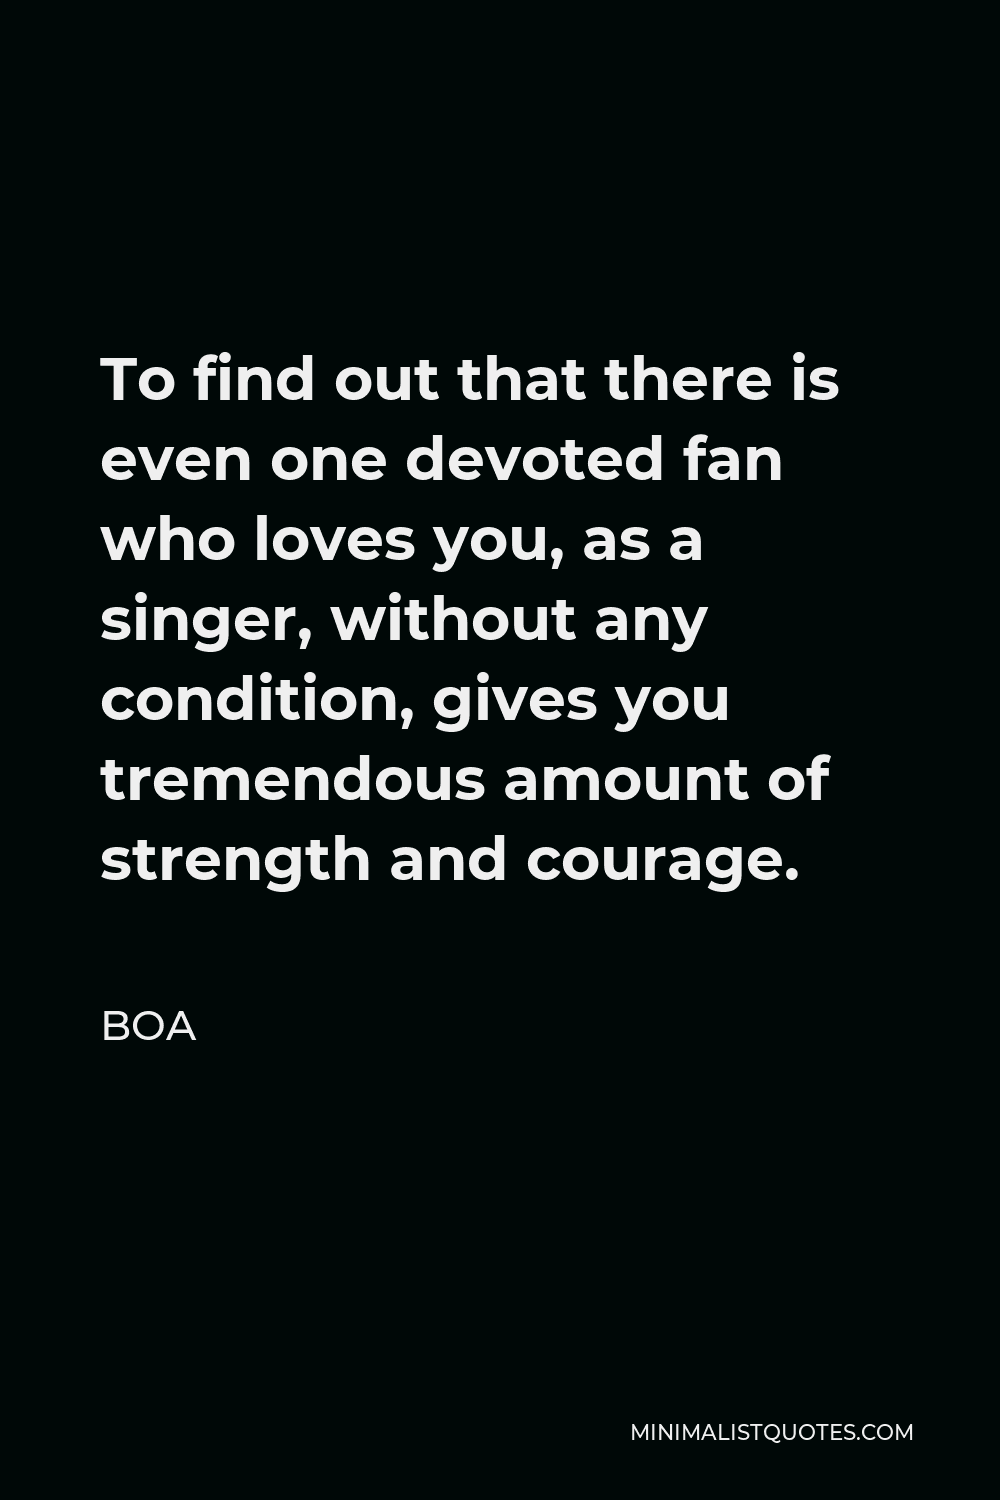 BoA Quote - To find out that there is even one devoted fan who loves you, as a singer, without any condition, gives you tremendous amount of strength and courage.